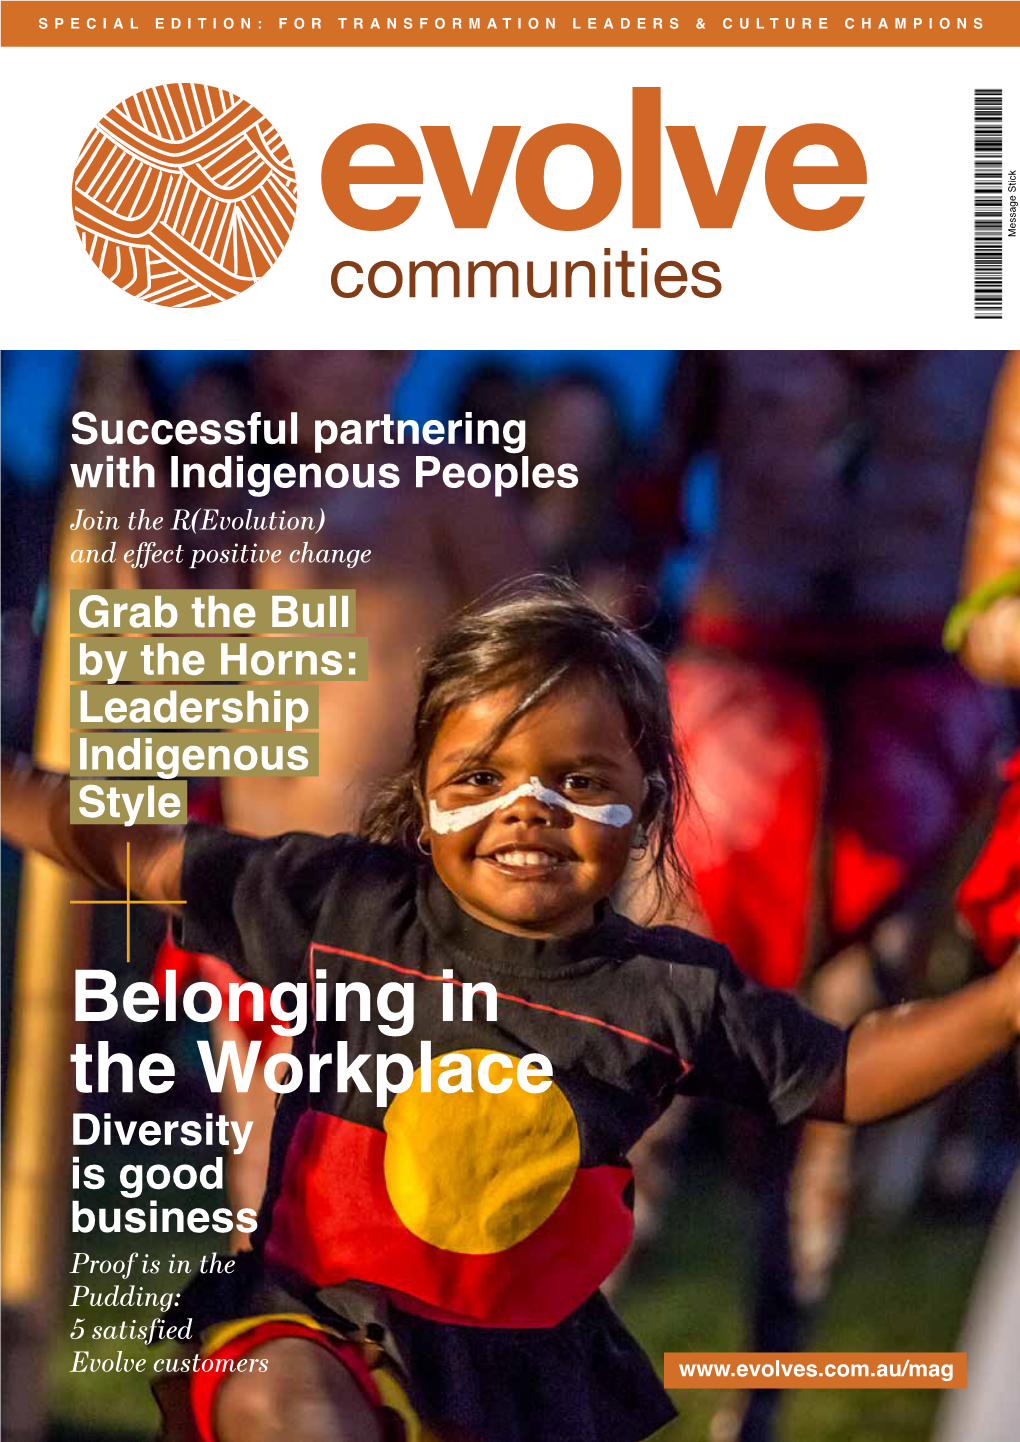 Belonging in the Workplace Diversity Is Good Business Proof Is in the Pudding: 5 Satisfied Evolve Customers Evolve Communities | Page 2